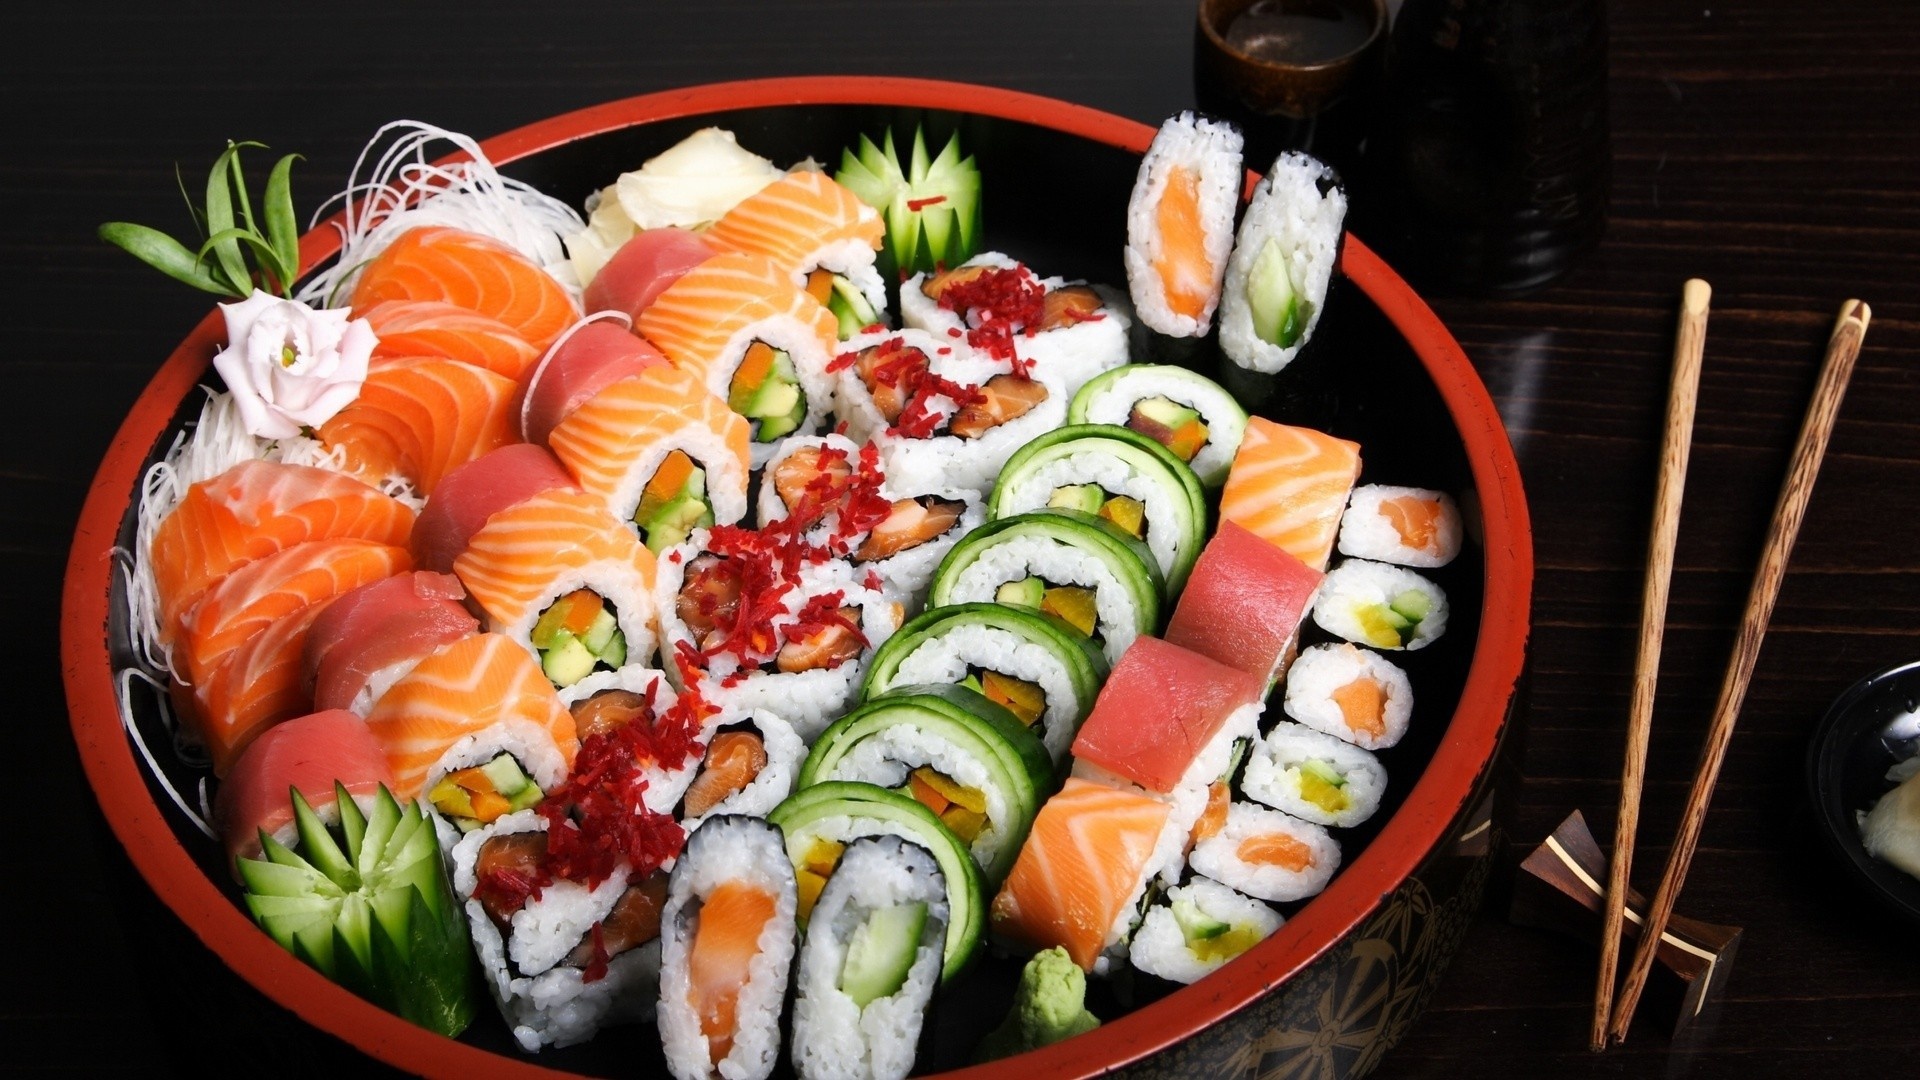 Sushi: Japanese meal comprising vinegared rice, seafood, fish, vegetables, and seaweed. 1920x1080 Full HD Background.